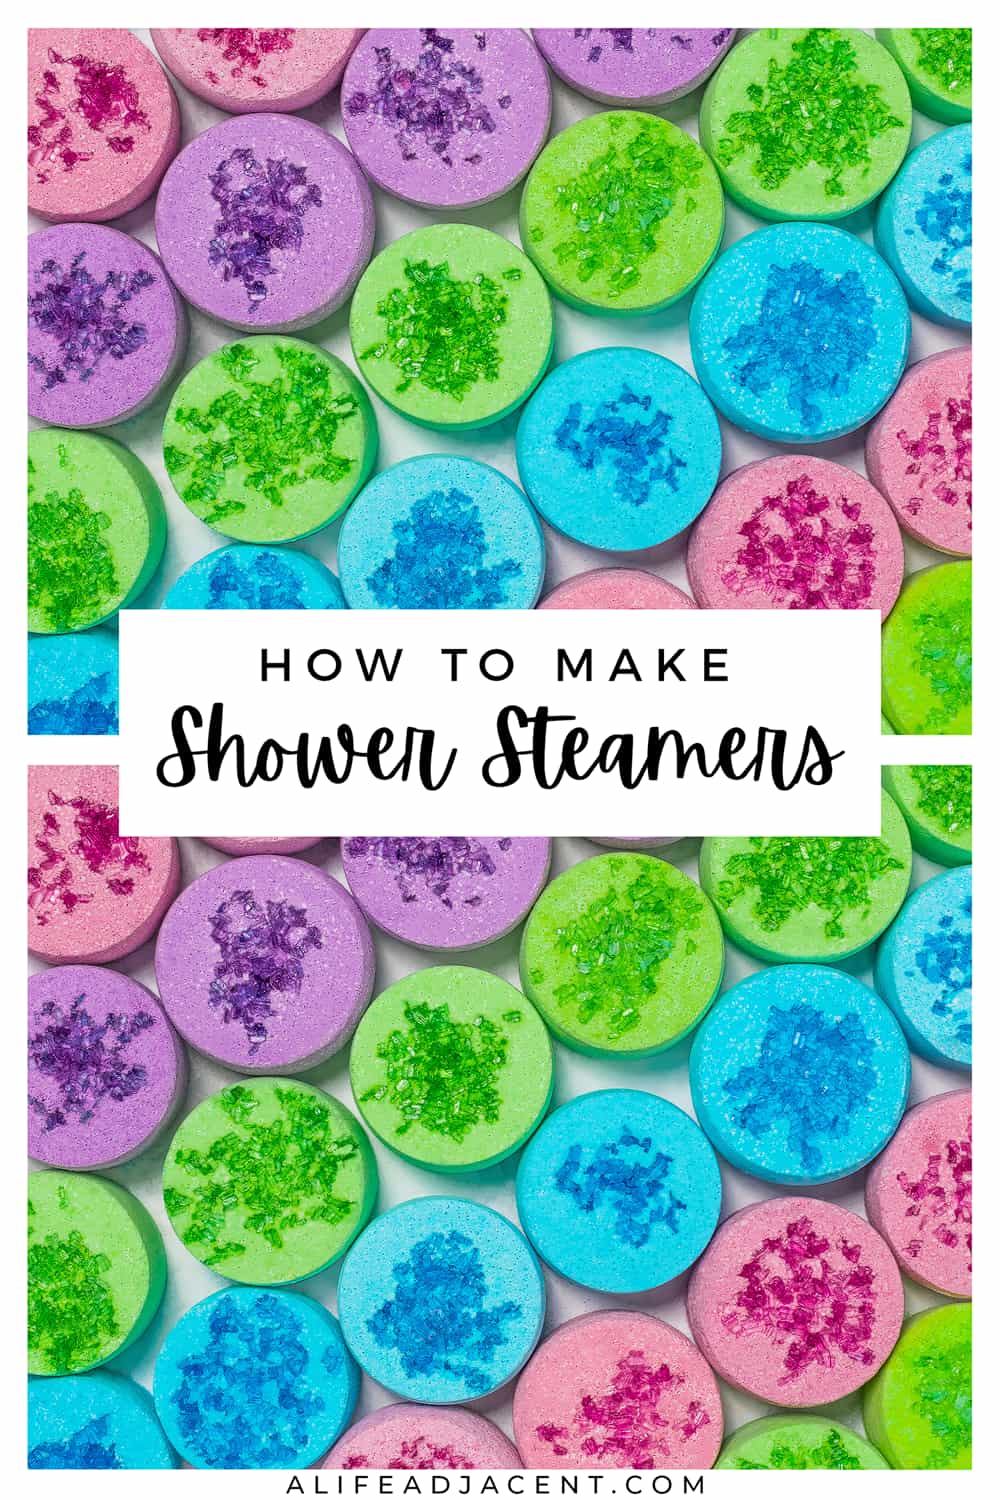 How to make shower steamers